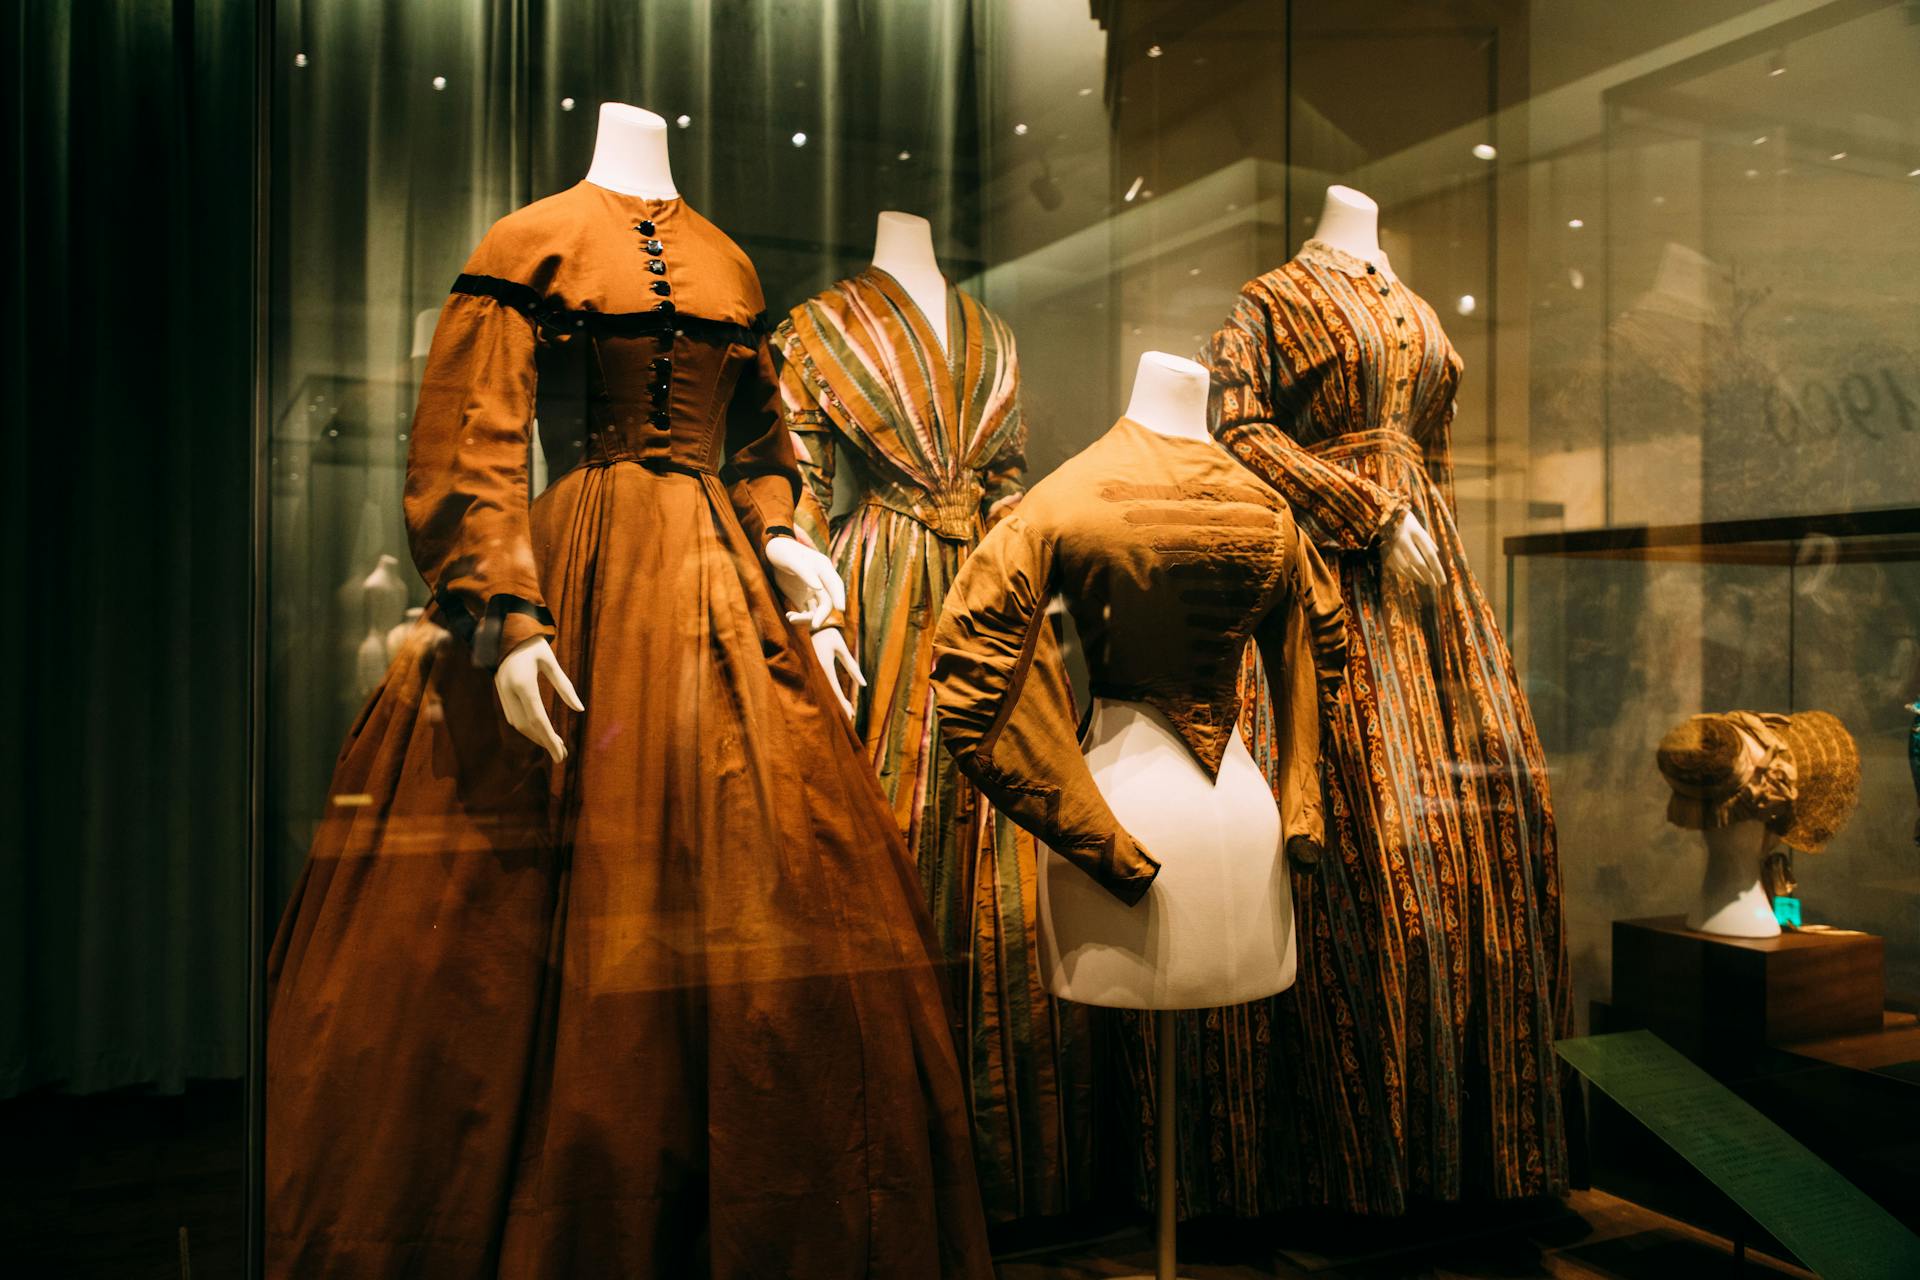 Through glass view of bright ornamental aged female dresses on mannequins on exhibition